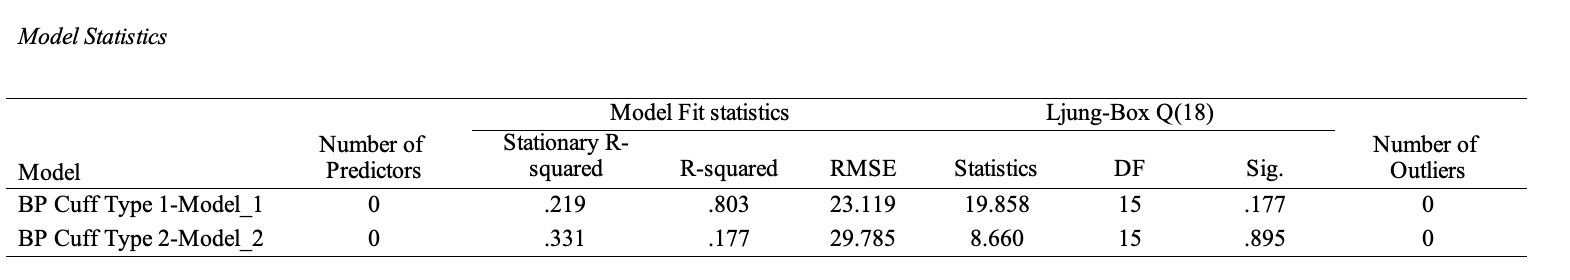 ARIMA analysis results for both cuff types